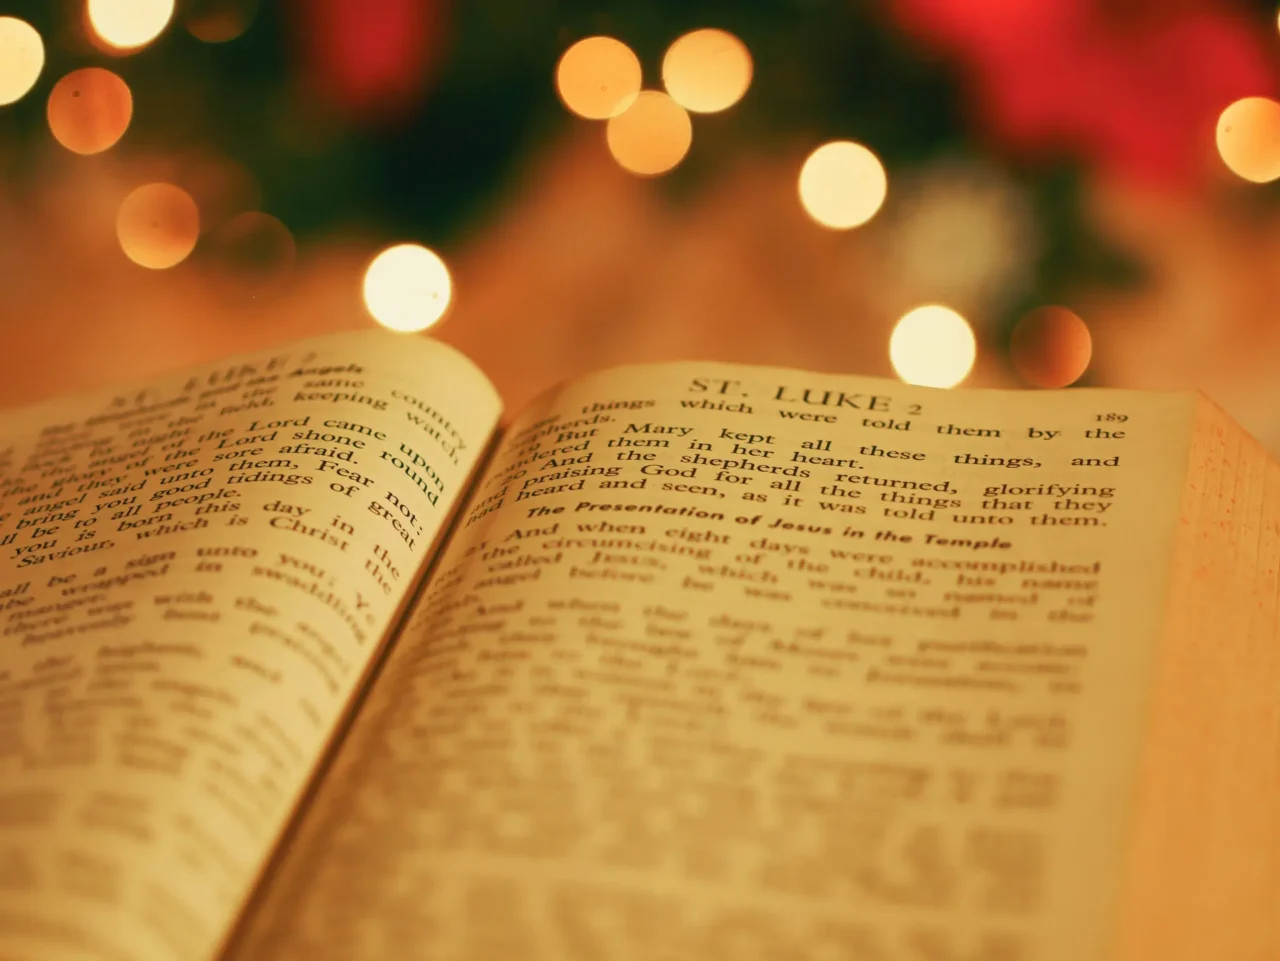 Biblical account of the first Christmas